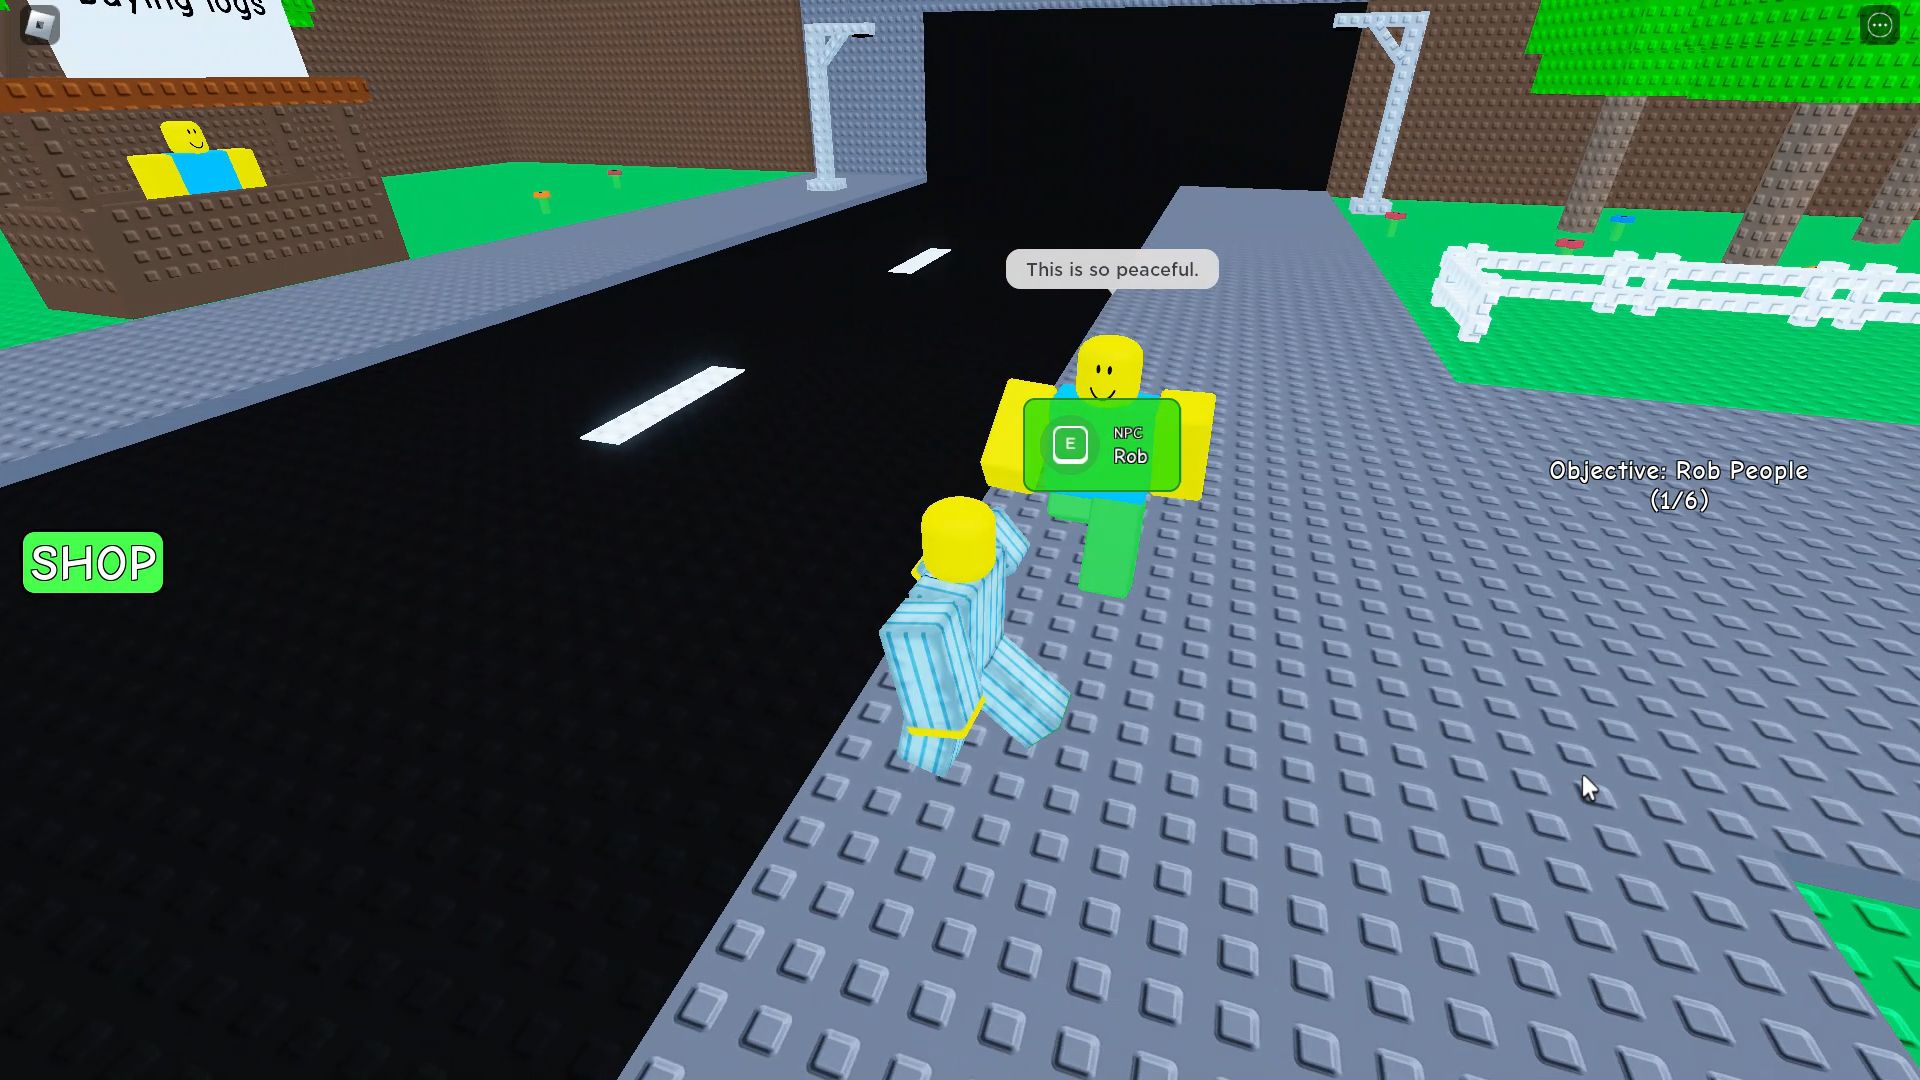 Roblox Need More Money - Robbing People